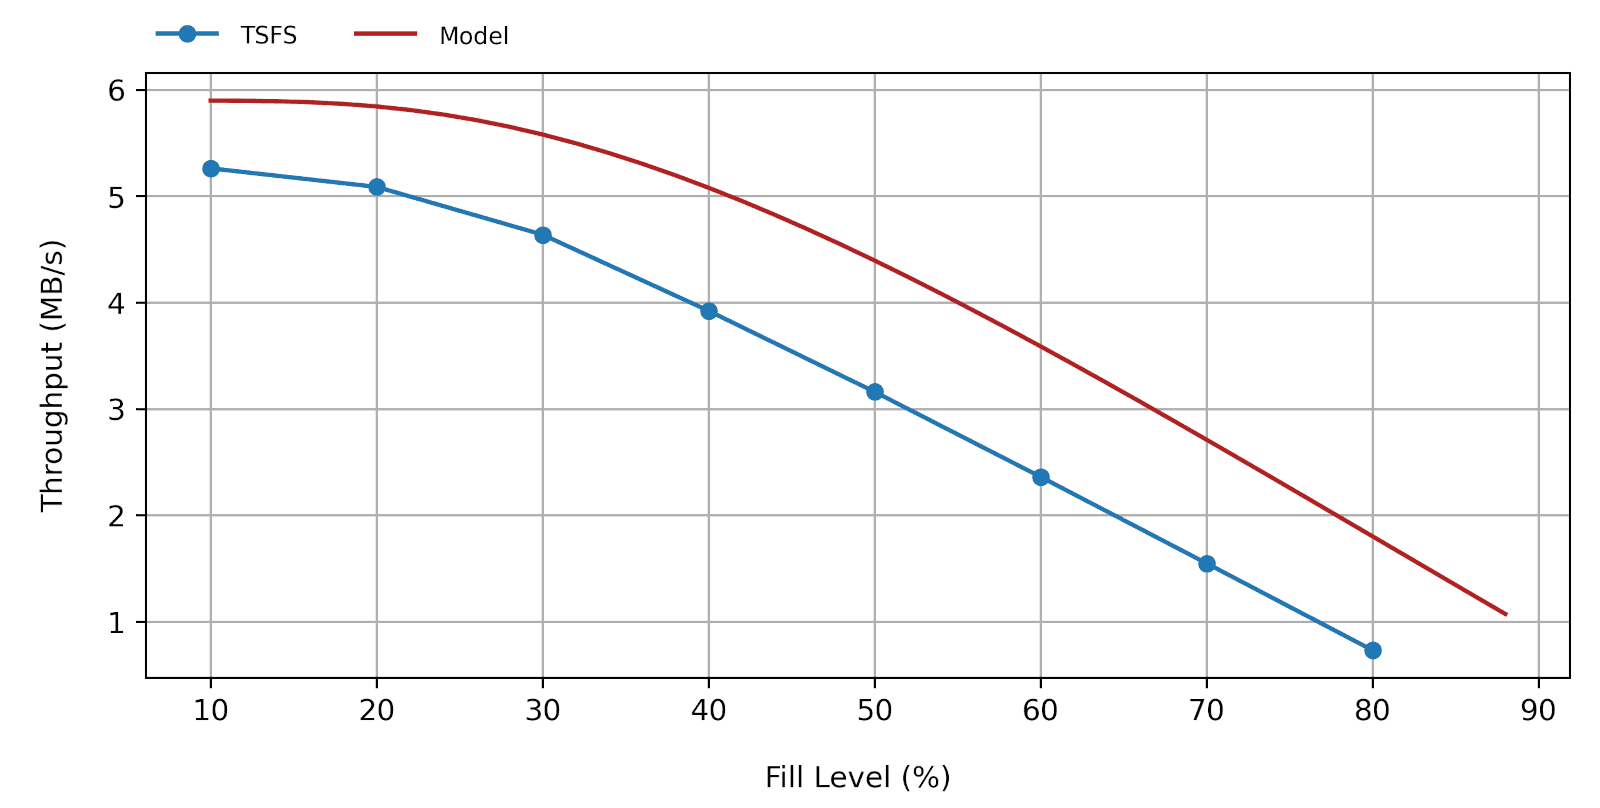 Graph of the performance of TSFS versus the theoretical model on NAND flash memory.